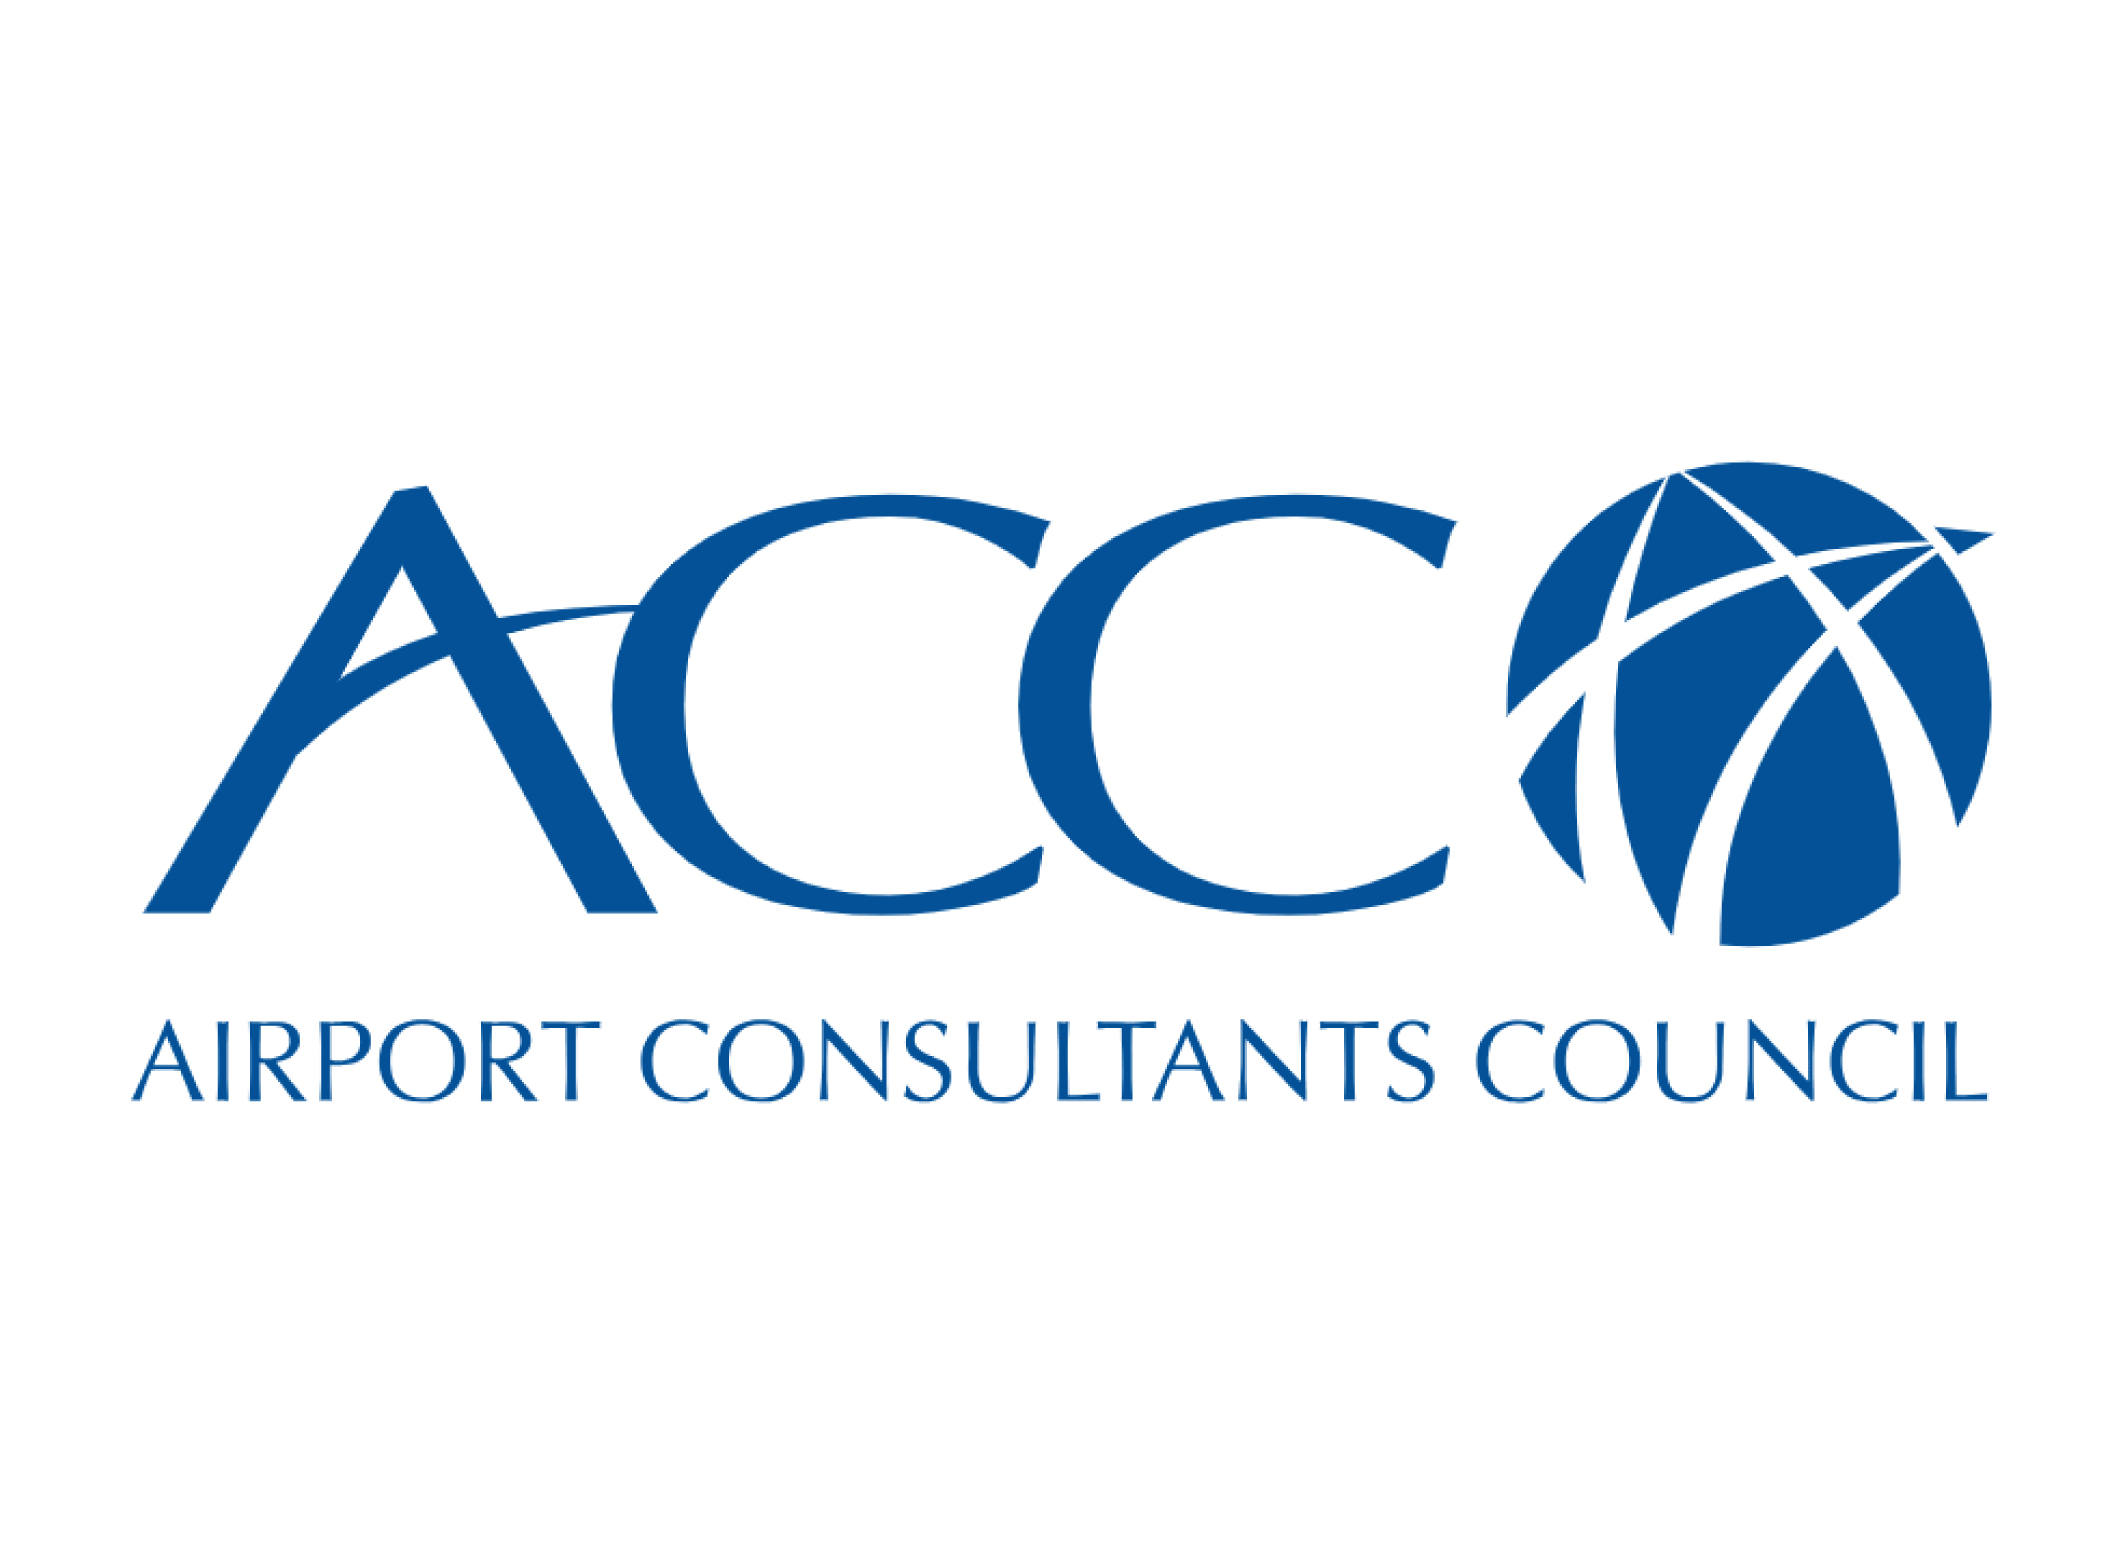 Primera Joins the Airport Consultants Council (ACC)